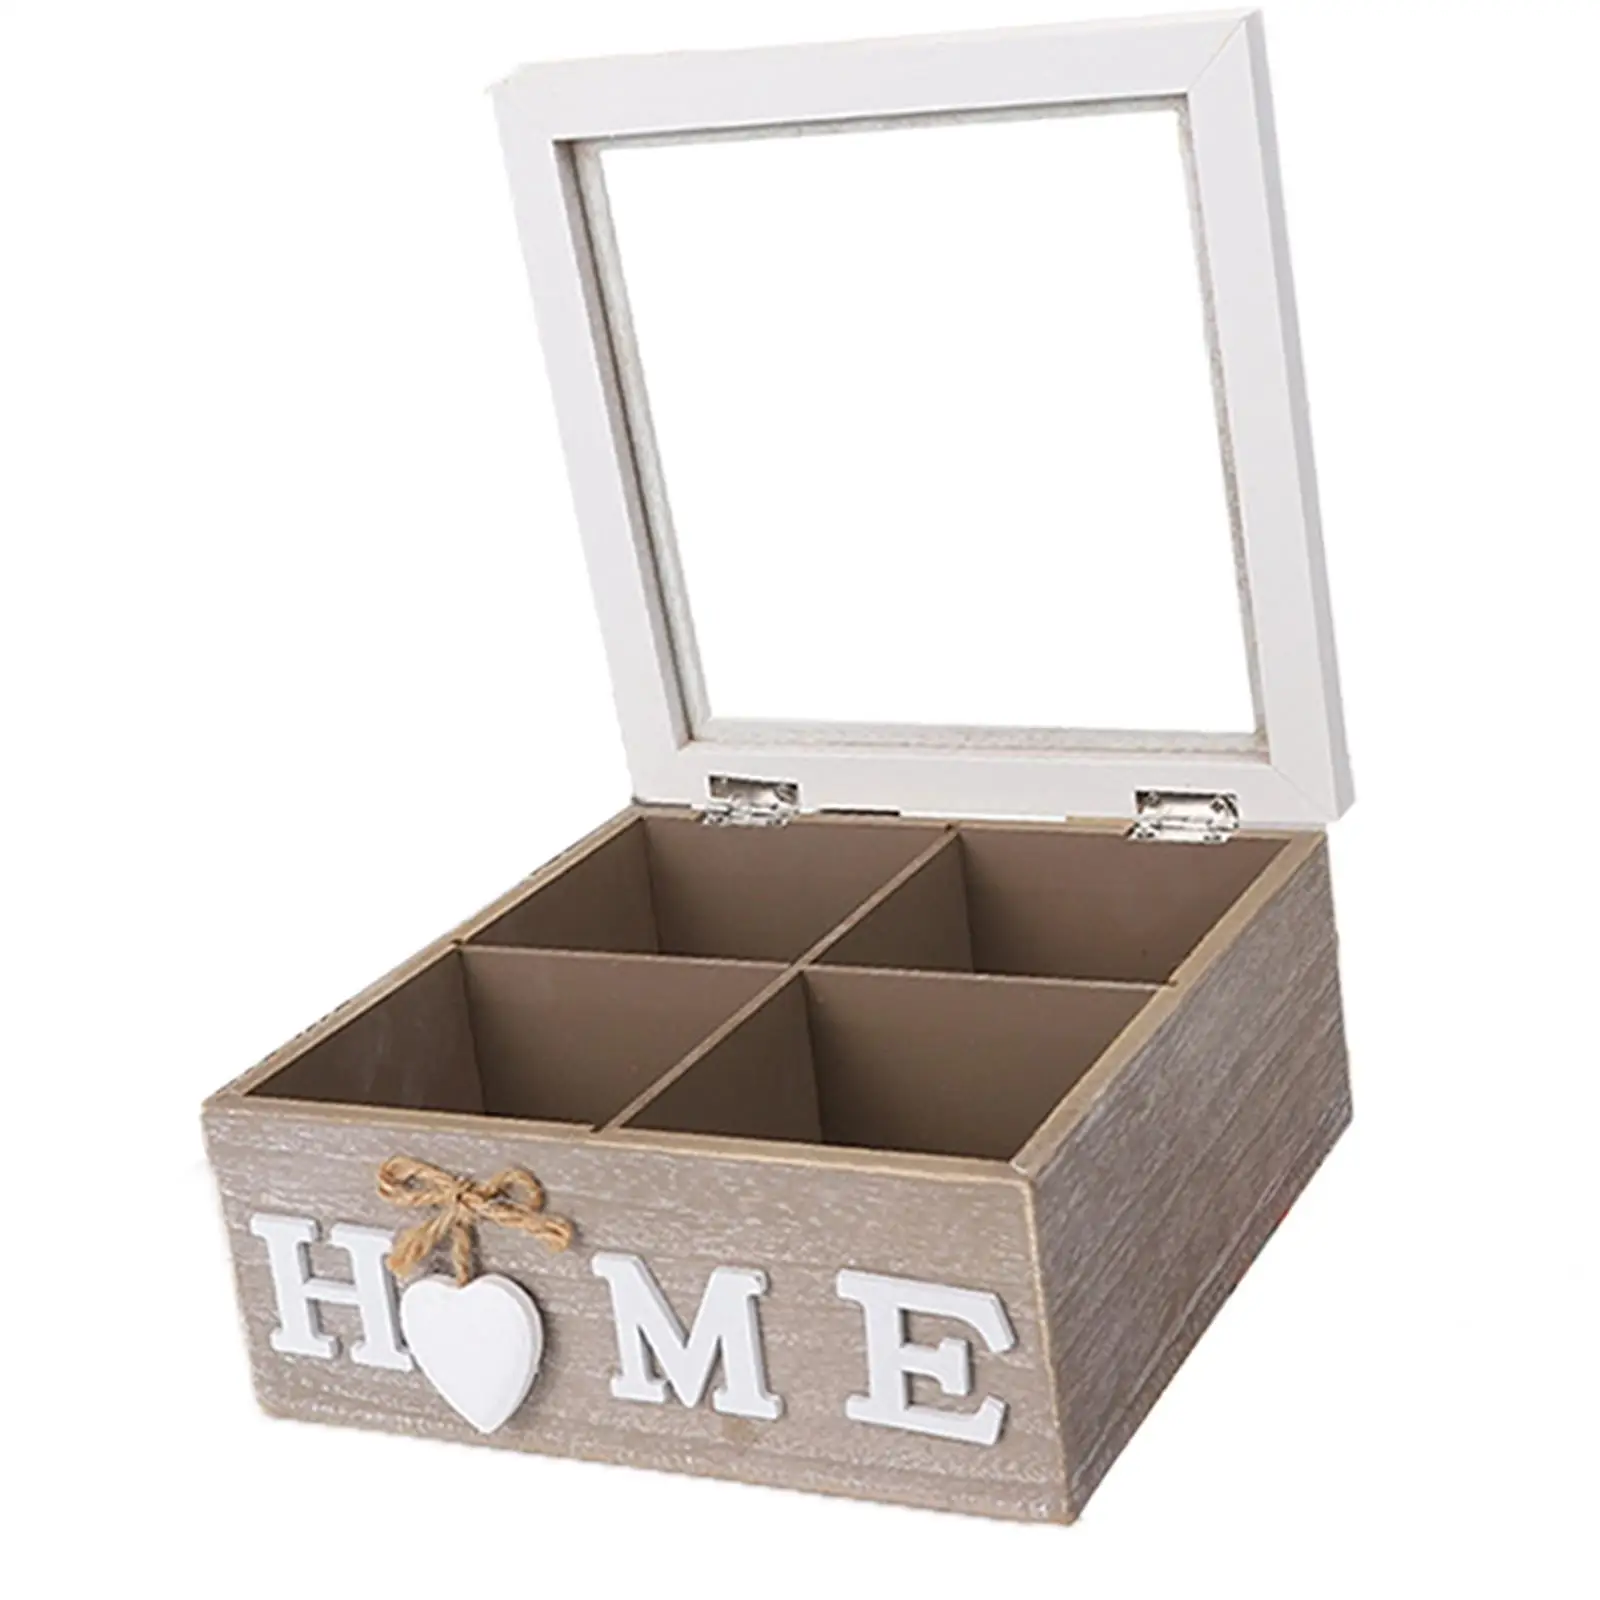 Wooden Tea Storage Box Kitchen Organiser Desktop Container with Viewing Window Jewelery Box for Creamers Tea Bags Coffee Pods